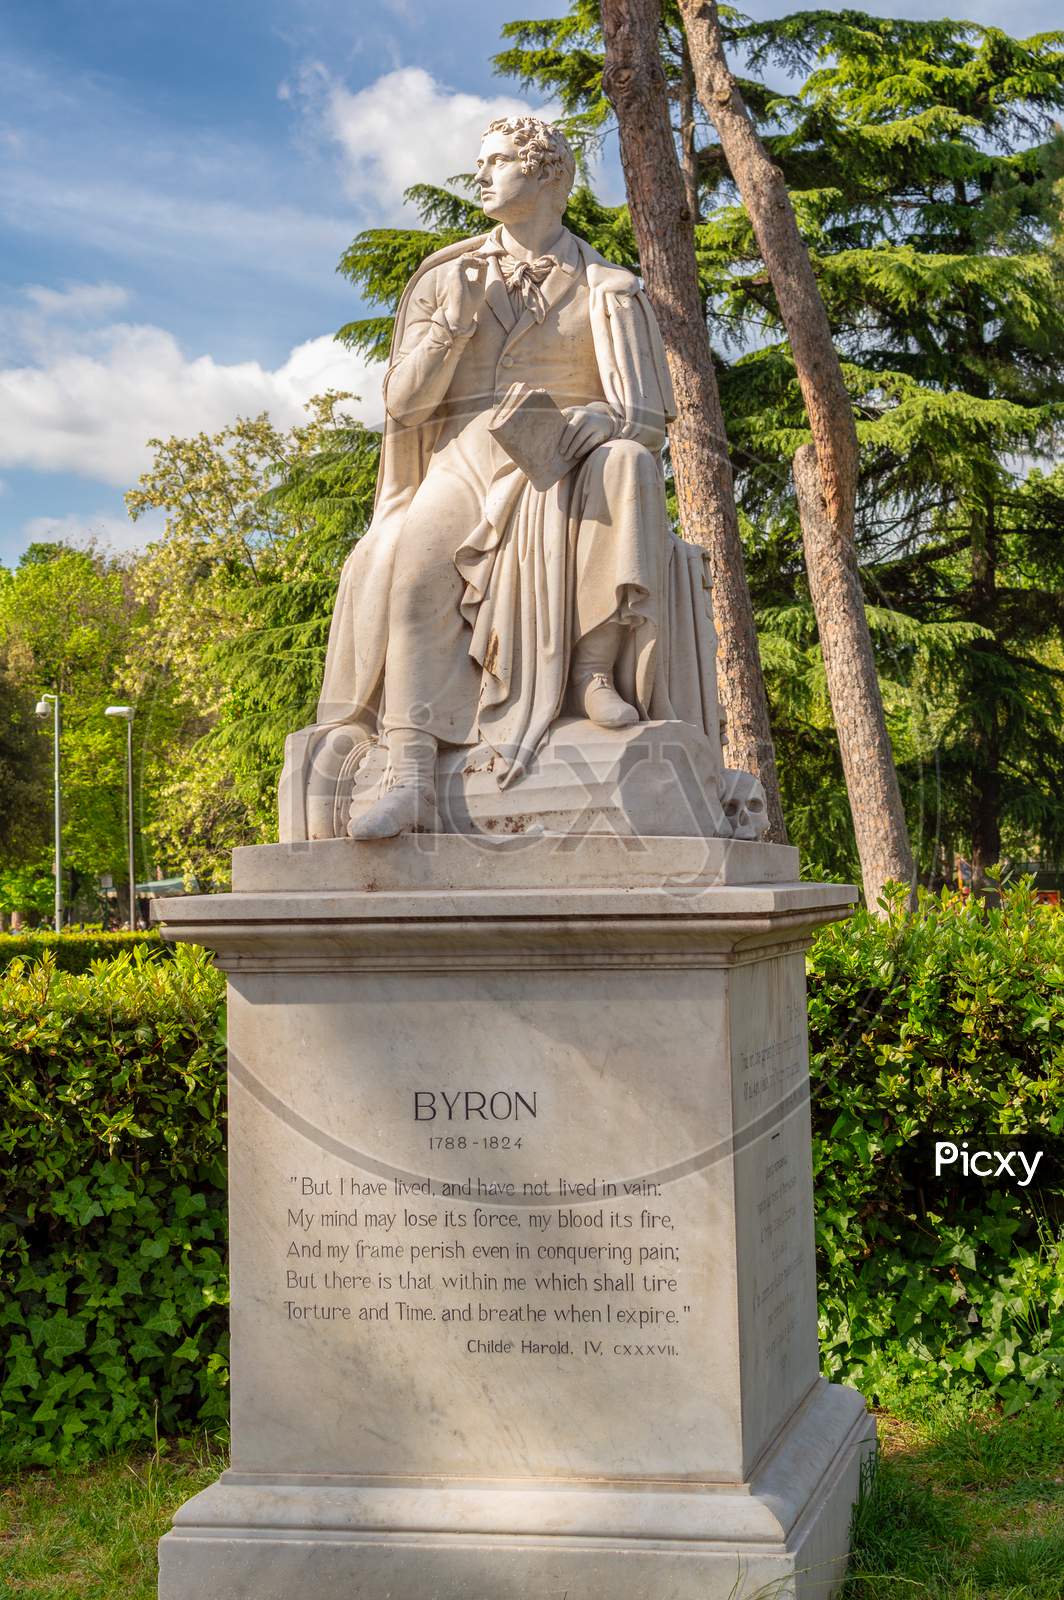 Monument To George Gordon Byron At The Villa Borghese Gardens In Rome, Italy